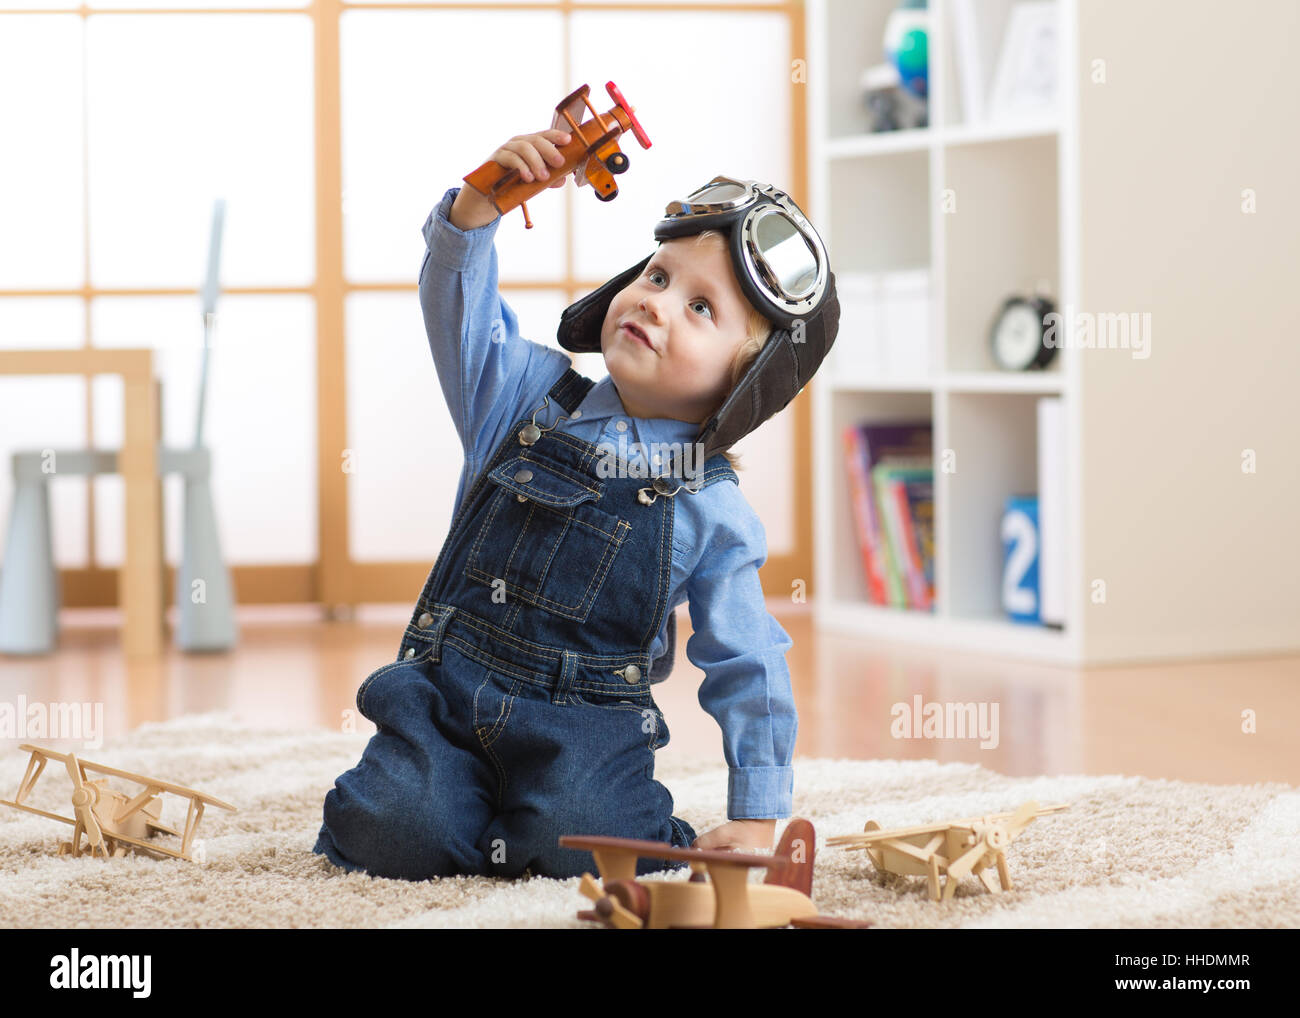 happy child toddler boy playing with toy airplane and dreaming of becoming a pilot Stock Photo